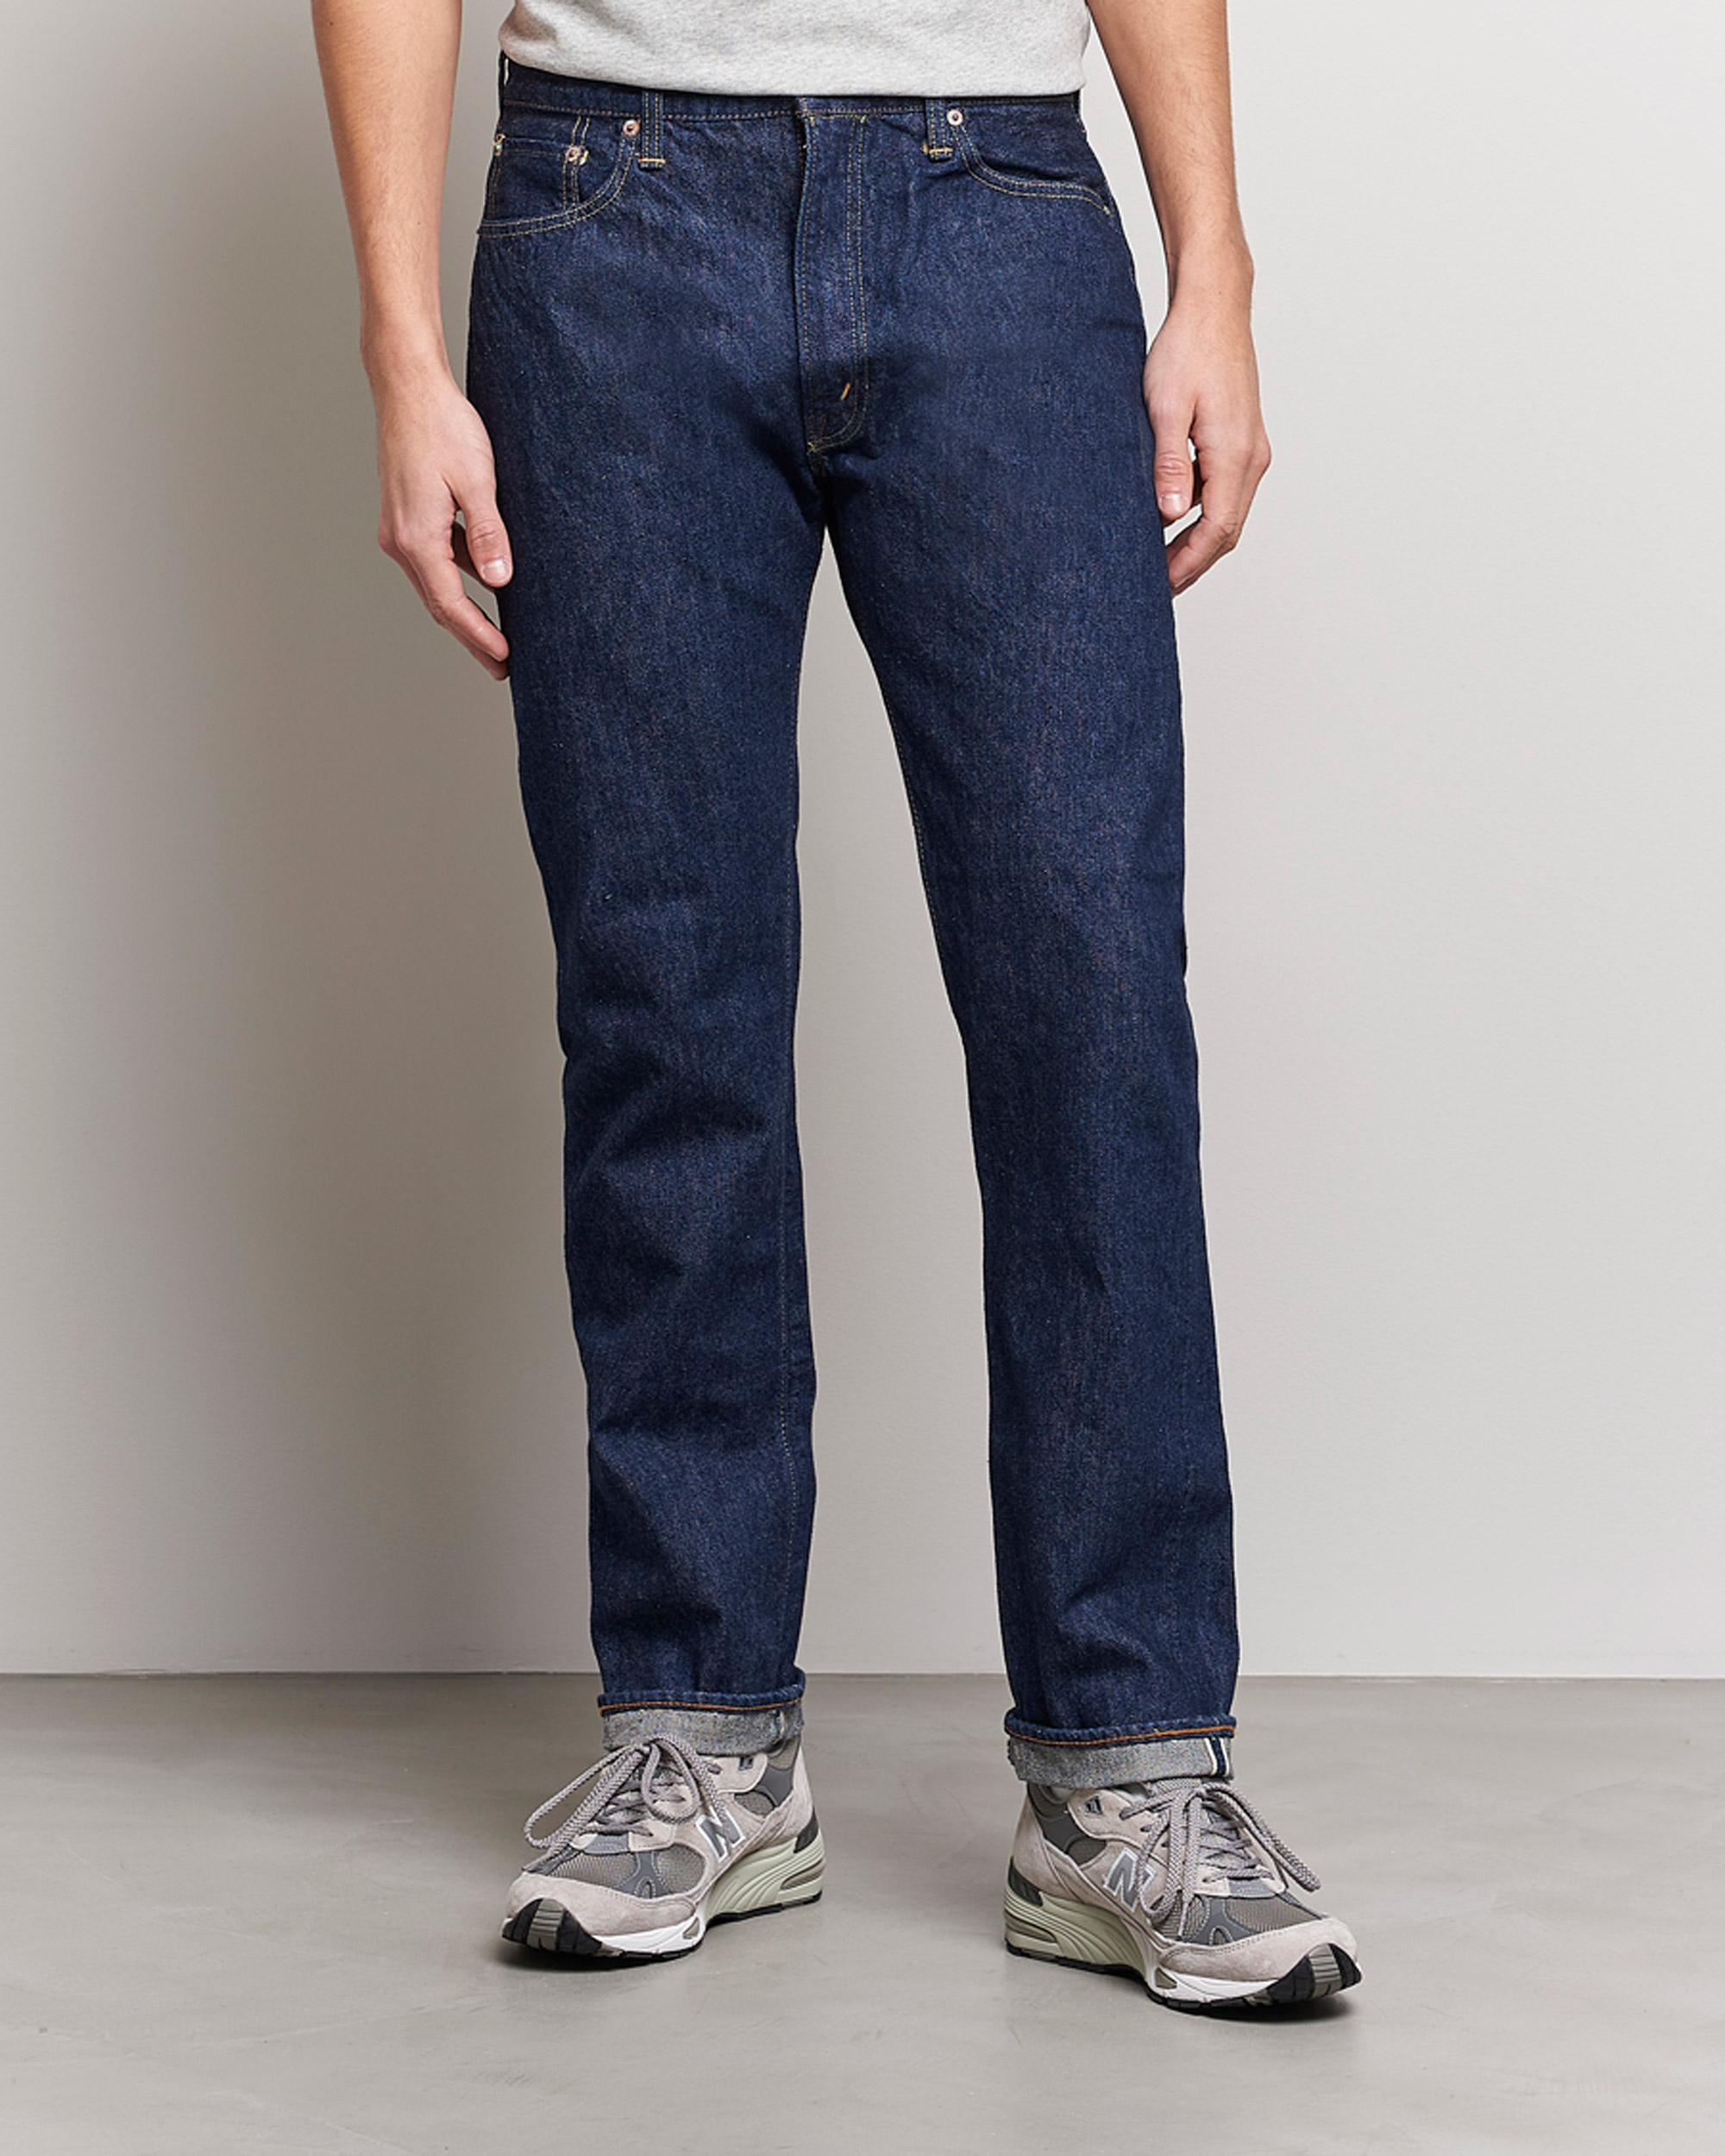 Men |  | orSlow | Tapered Fit 107 Selvedge Jeans One Wash